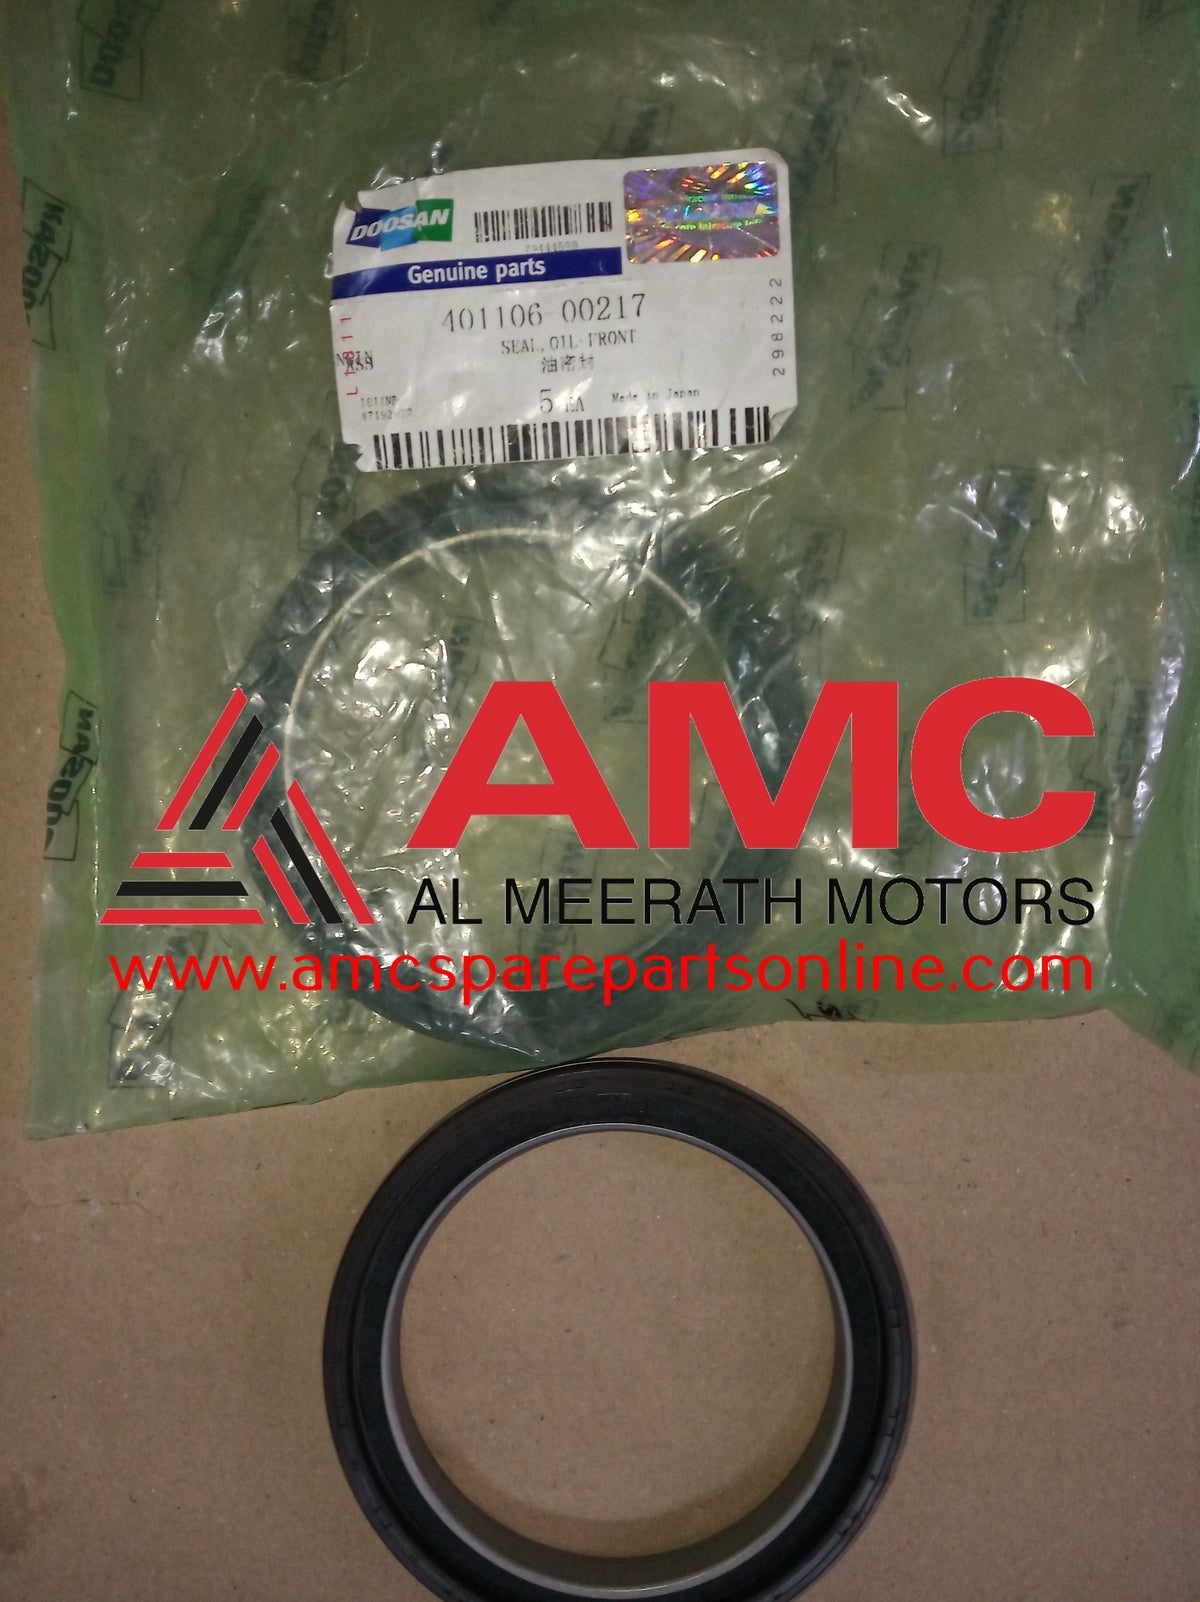 TIMING OIL SEAL SMALL 65015100157 / 40110600217